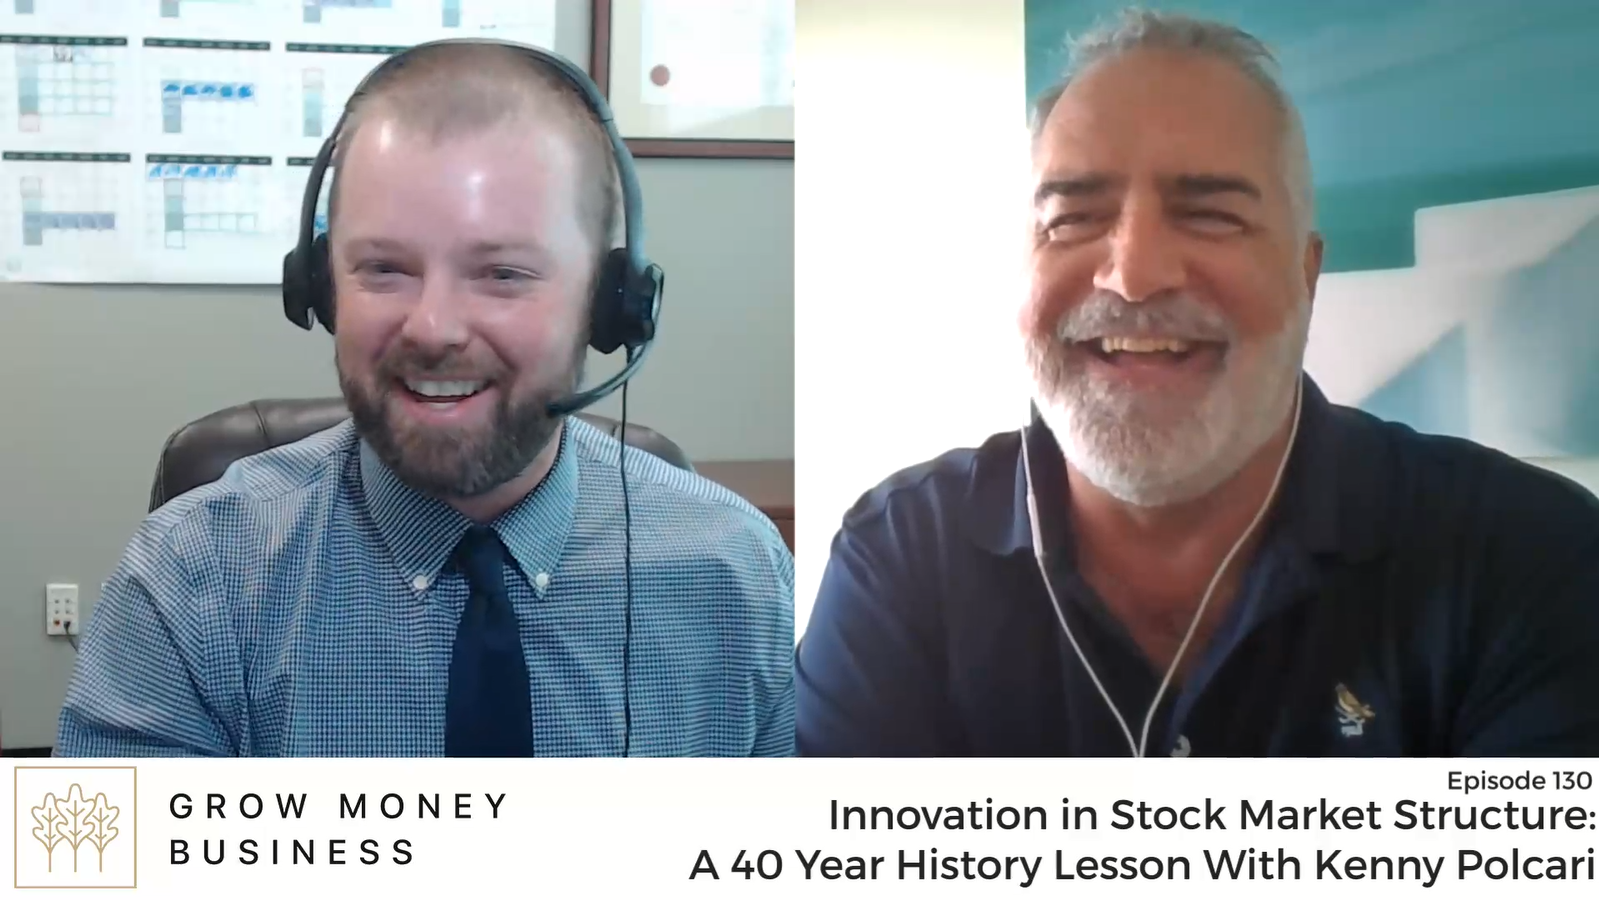 Episode #130: Innovation in Stock Market Structure: A 40 Year History Lesson